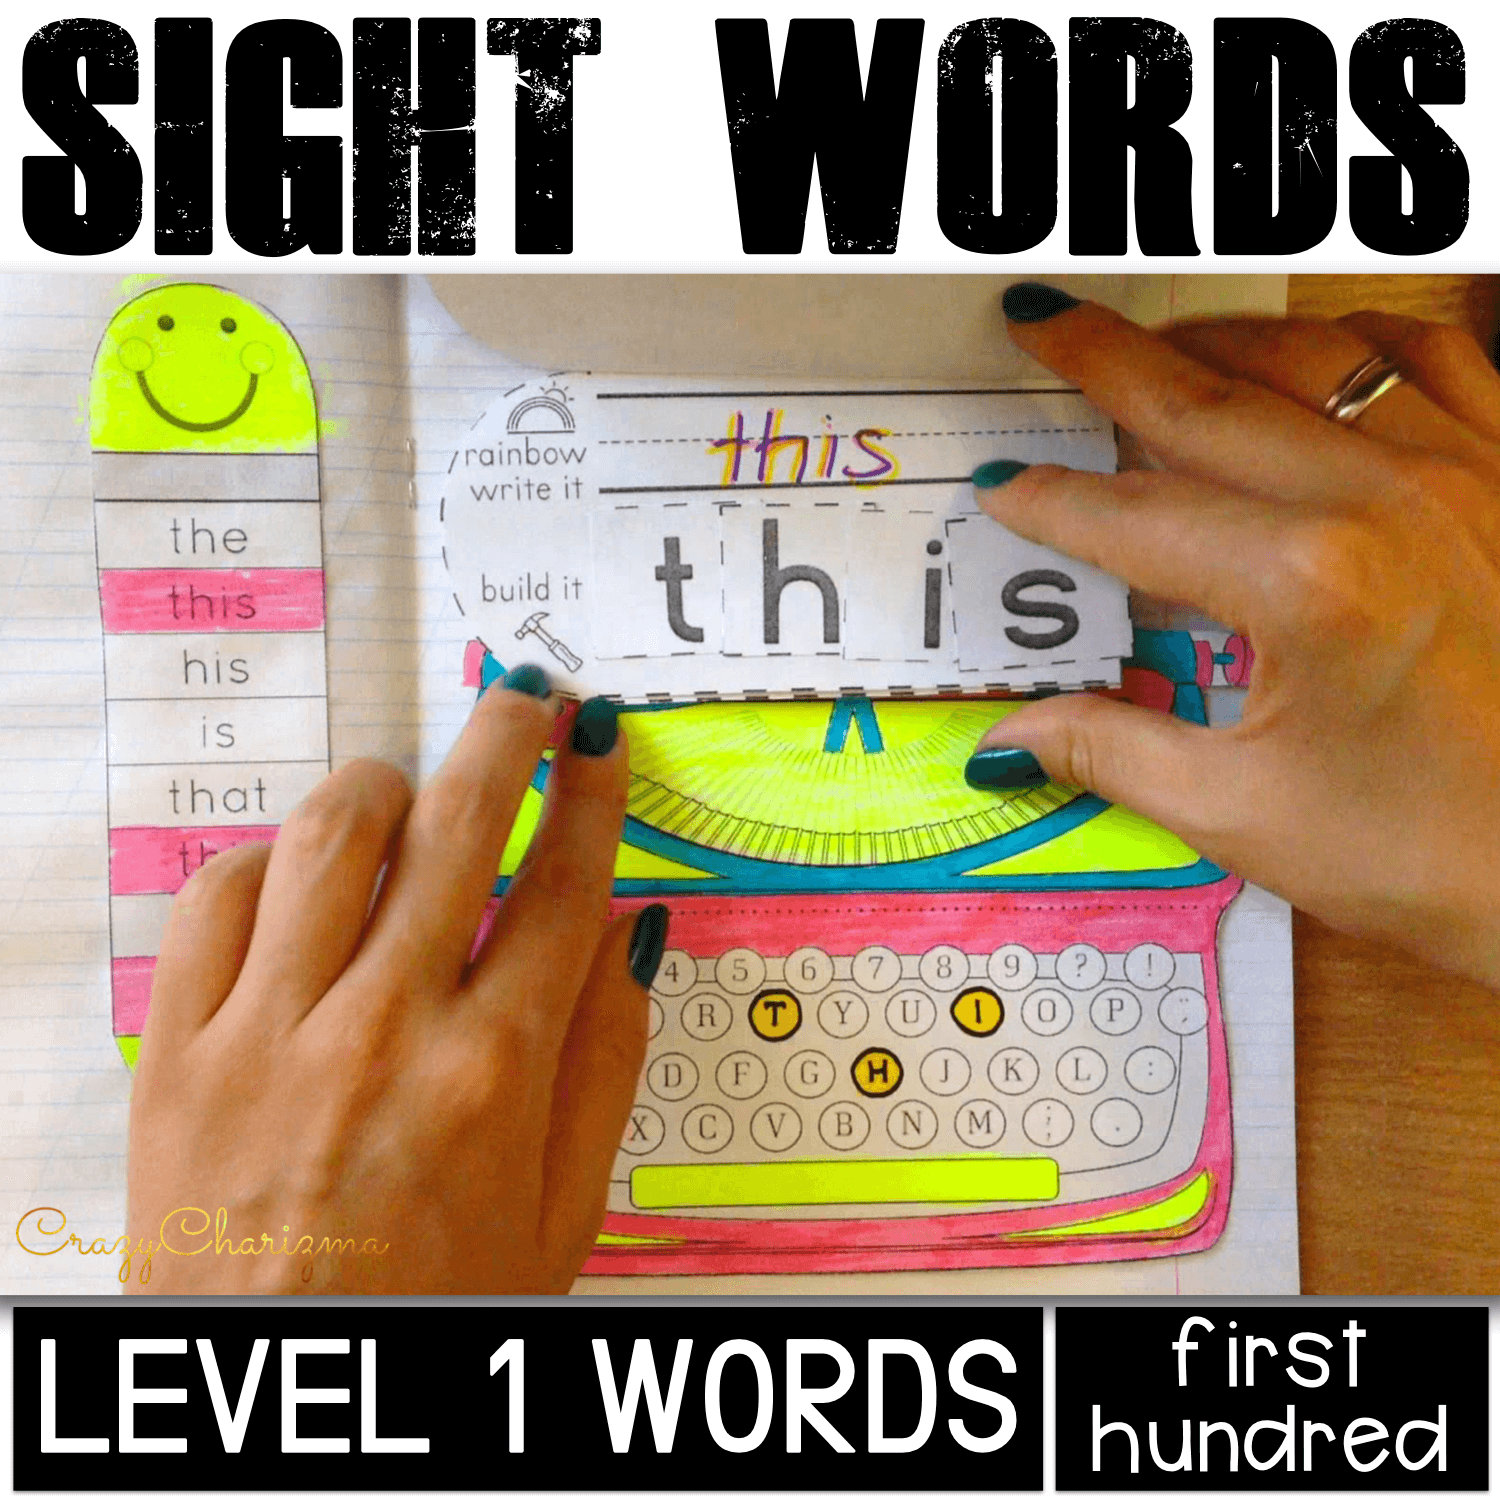 These activities for kids provide engaging, hands-on ways to build up sight words knowledge and increase reading skills. Use the packet as interactive notebooks or no-prep worksheets and master high frequency words.